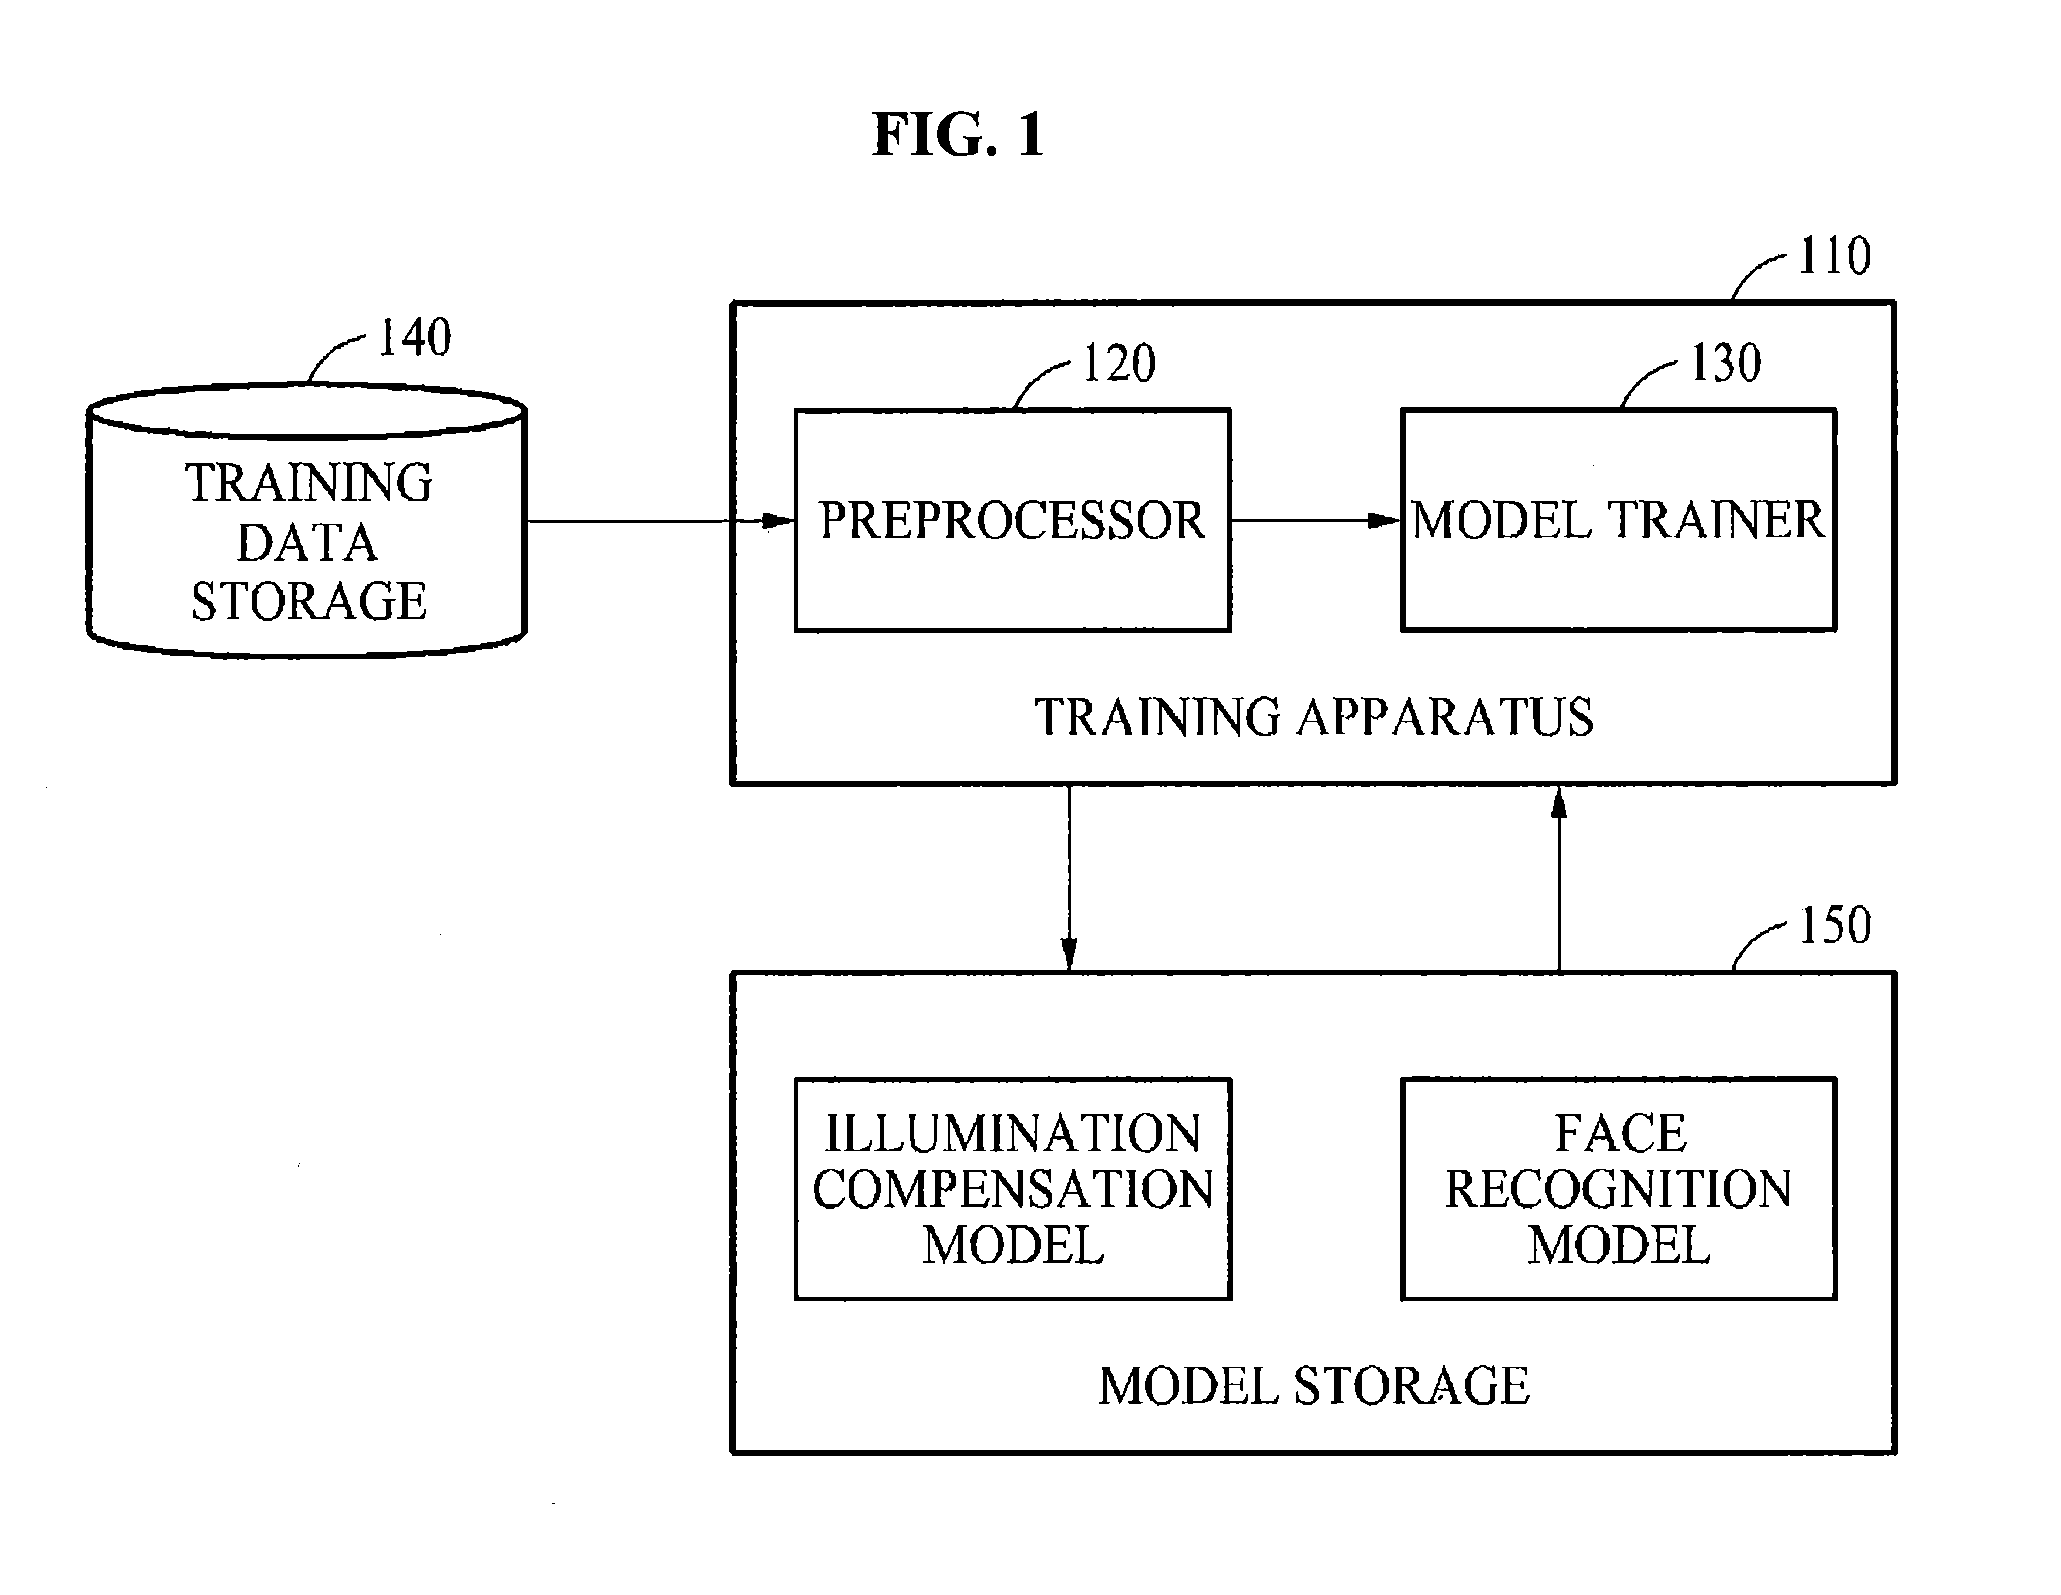 Method and apparatus for face recognition